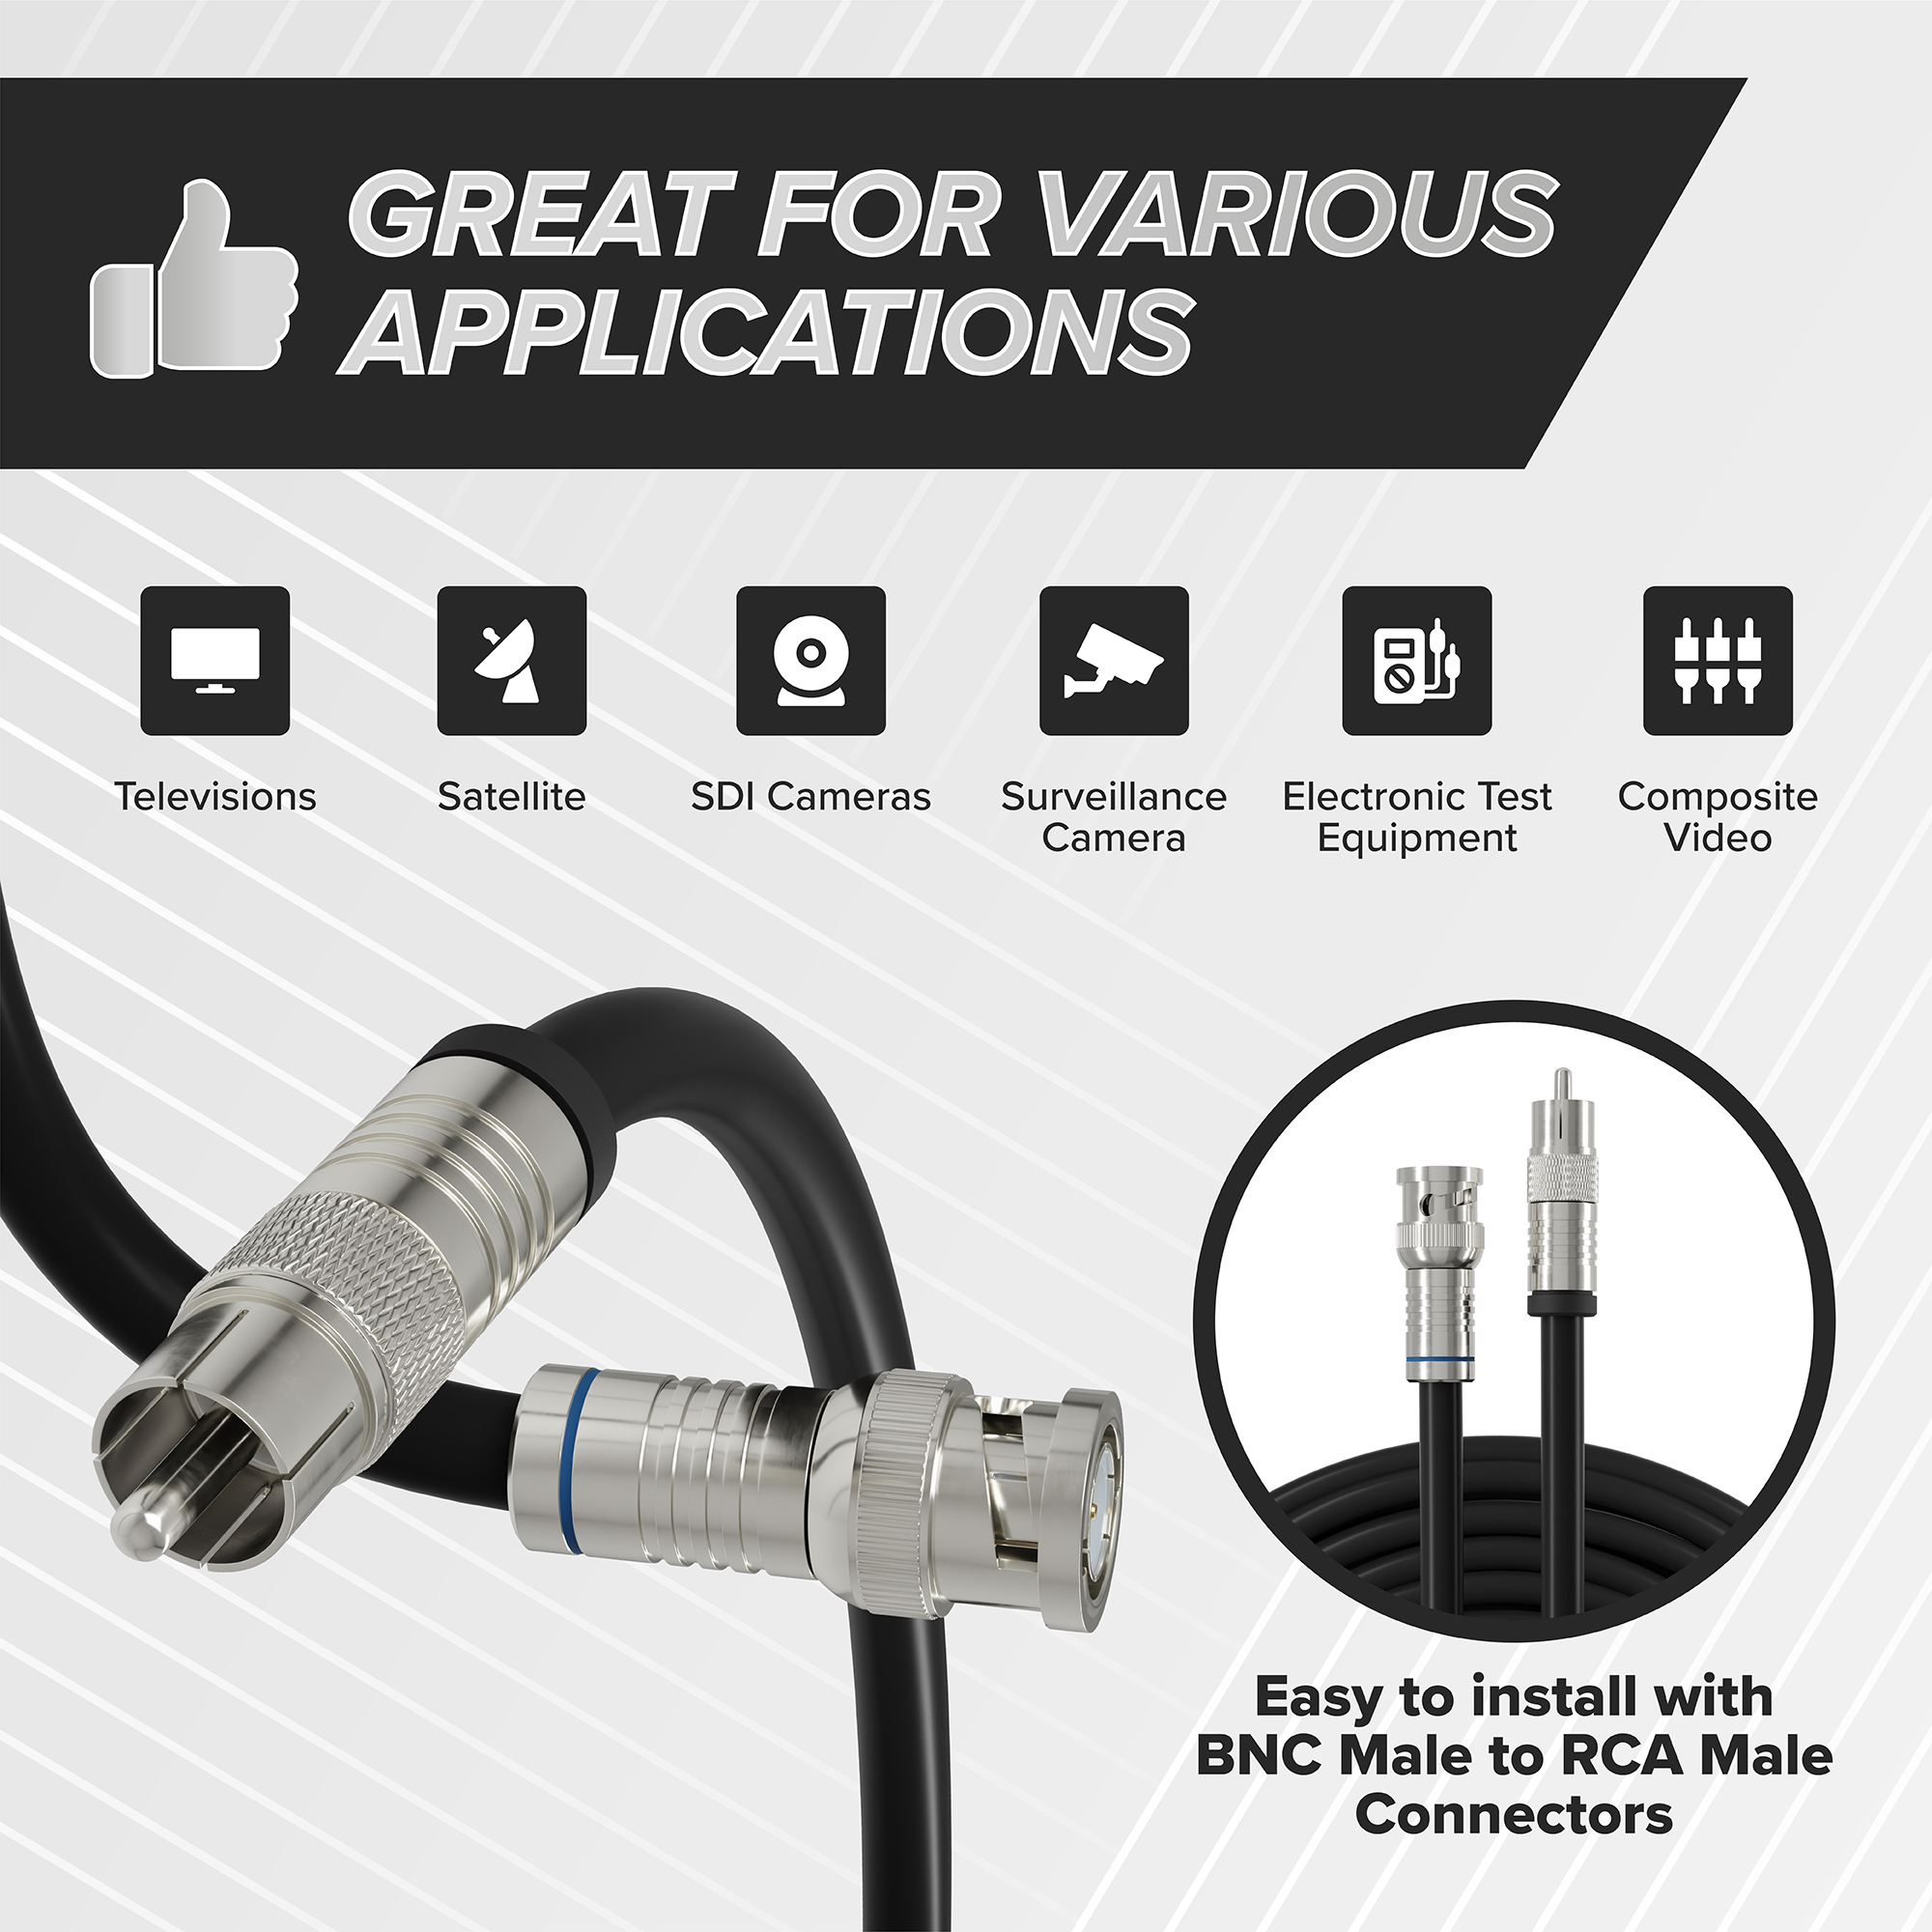 Black, 6 ft BNC to RCA RG6 Cable - Professional Grade - Male BNC to Male RCA Cable  - BNC Cable - 75 Ohm Coaxial, 50/75 Ohm Connectors, SDI, HD-SDI, CCTV, Camera, and More - 6 Feet Long, in Black - image 2 of 10